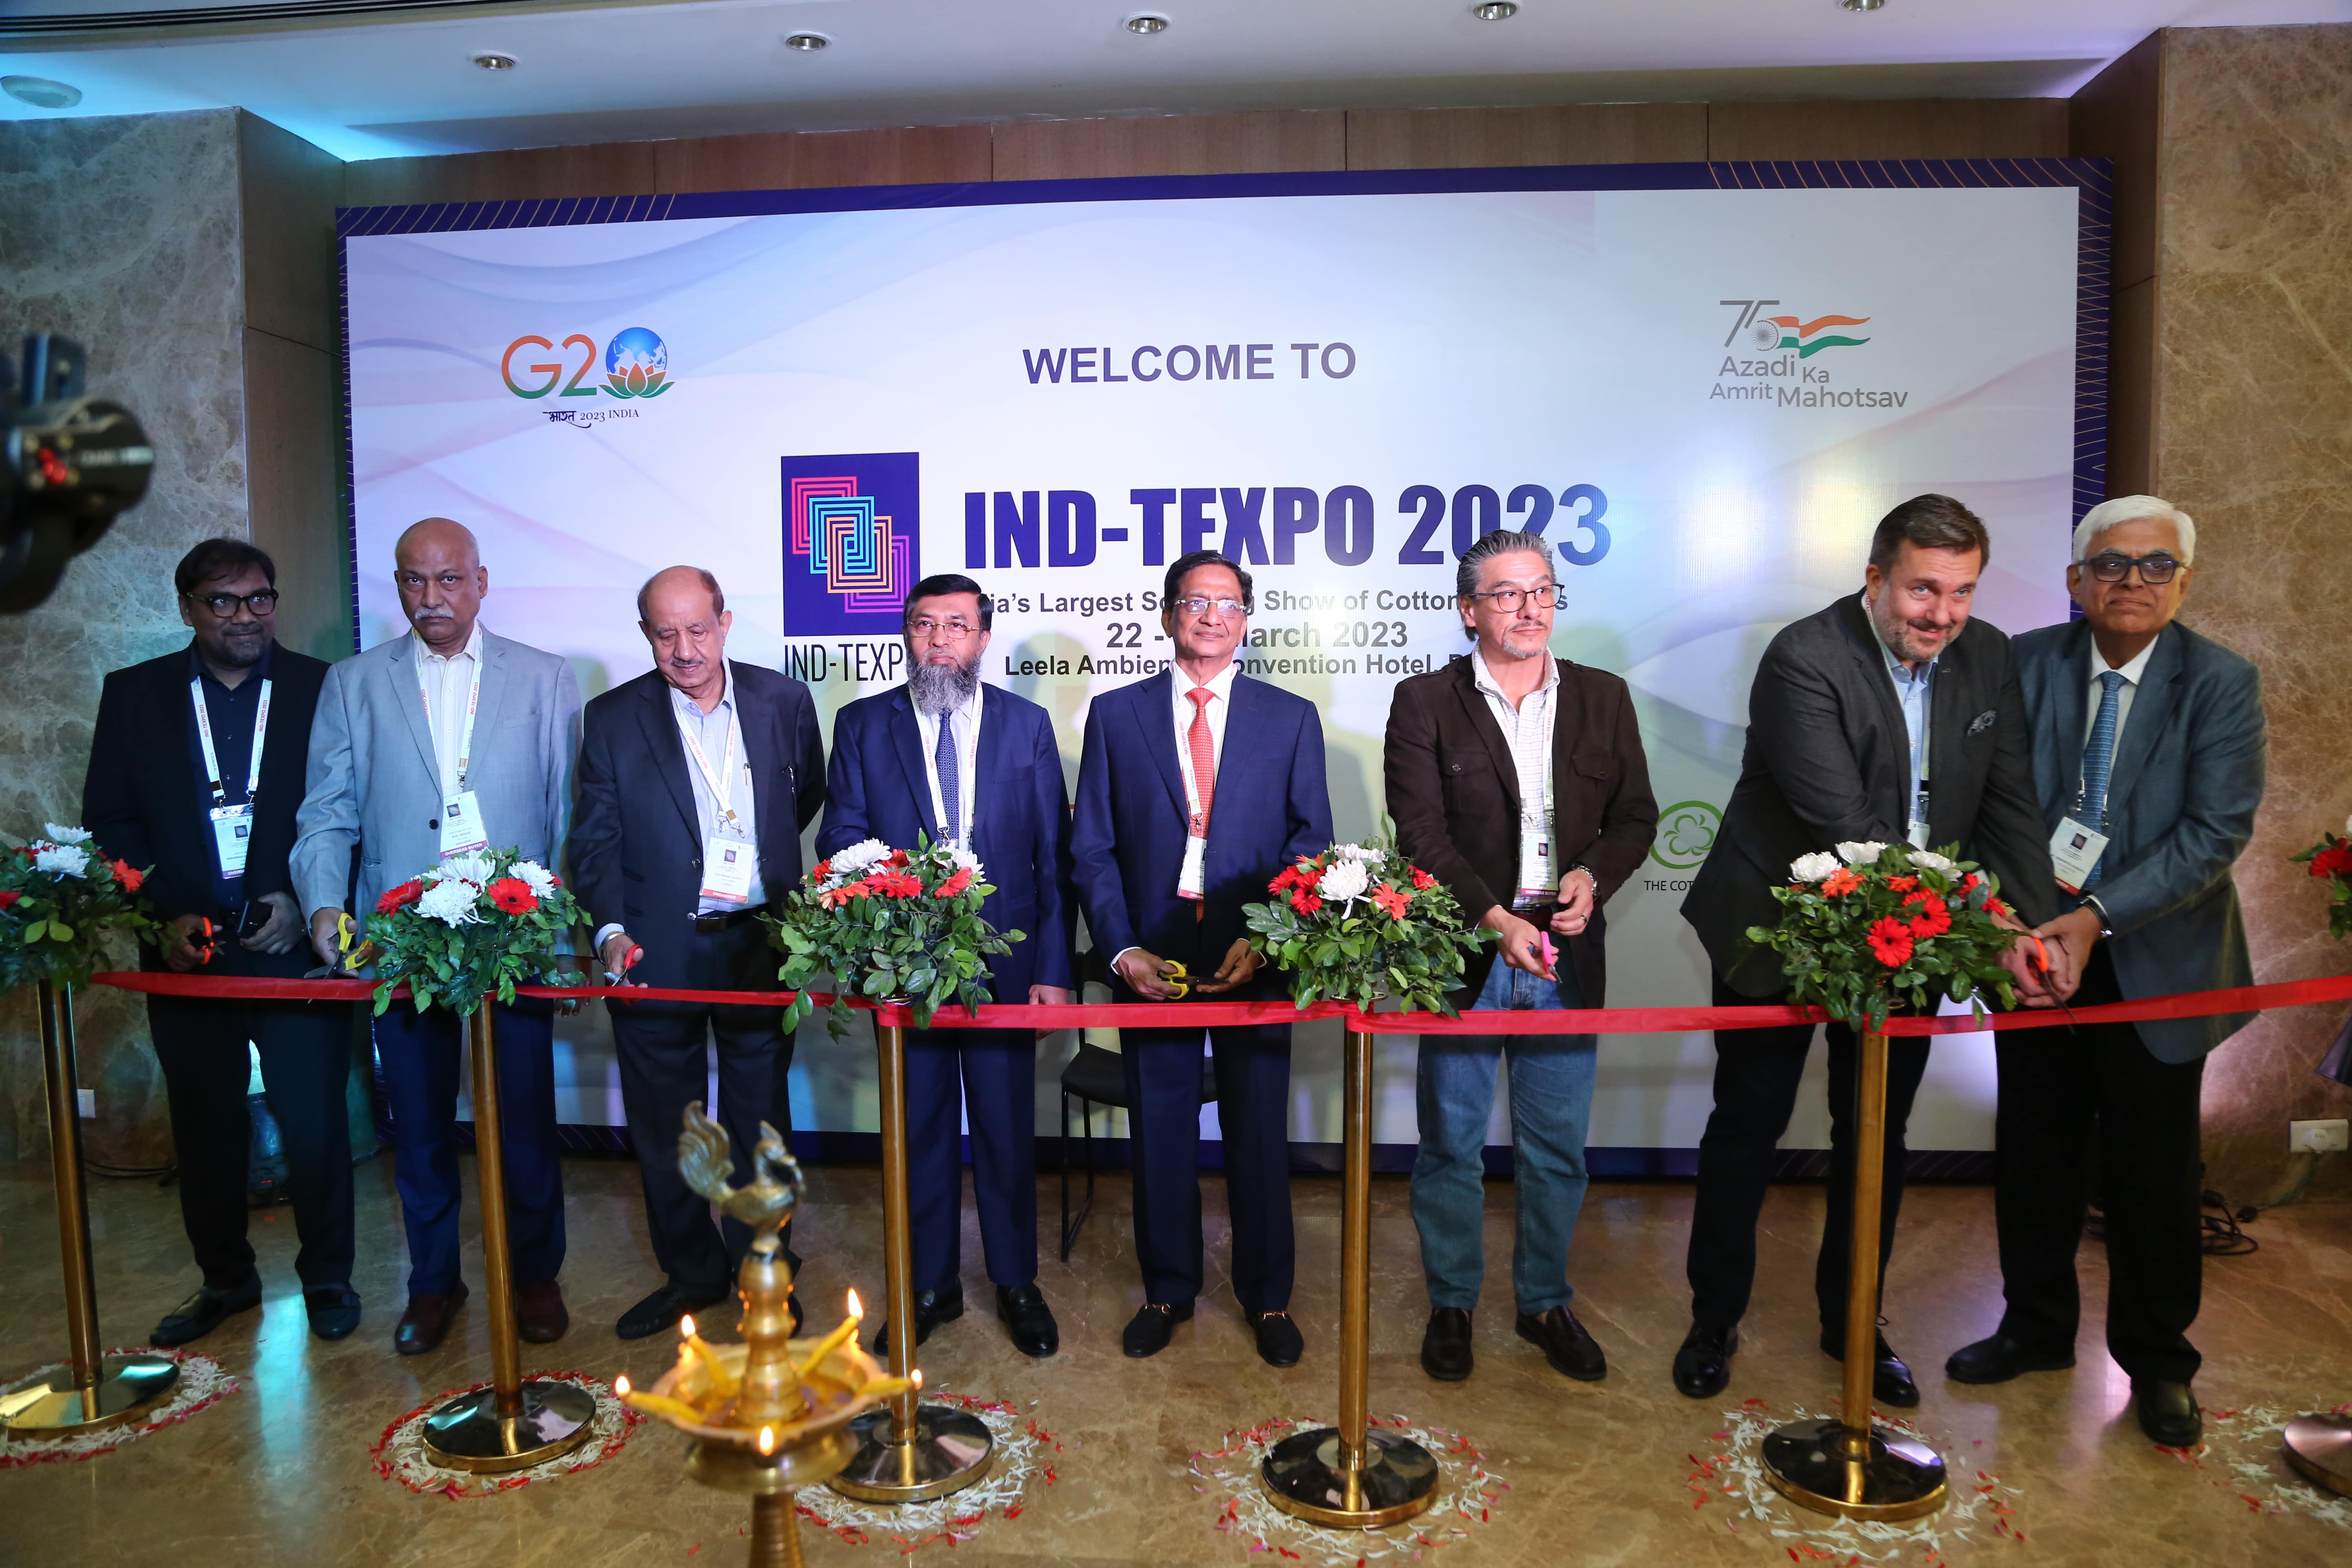 Inauguration of Reverse Buyer Seller Meet (RBSM), “Ind-Texpo” held in Delhi from March 22-23, 2023